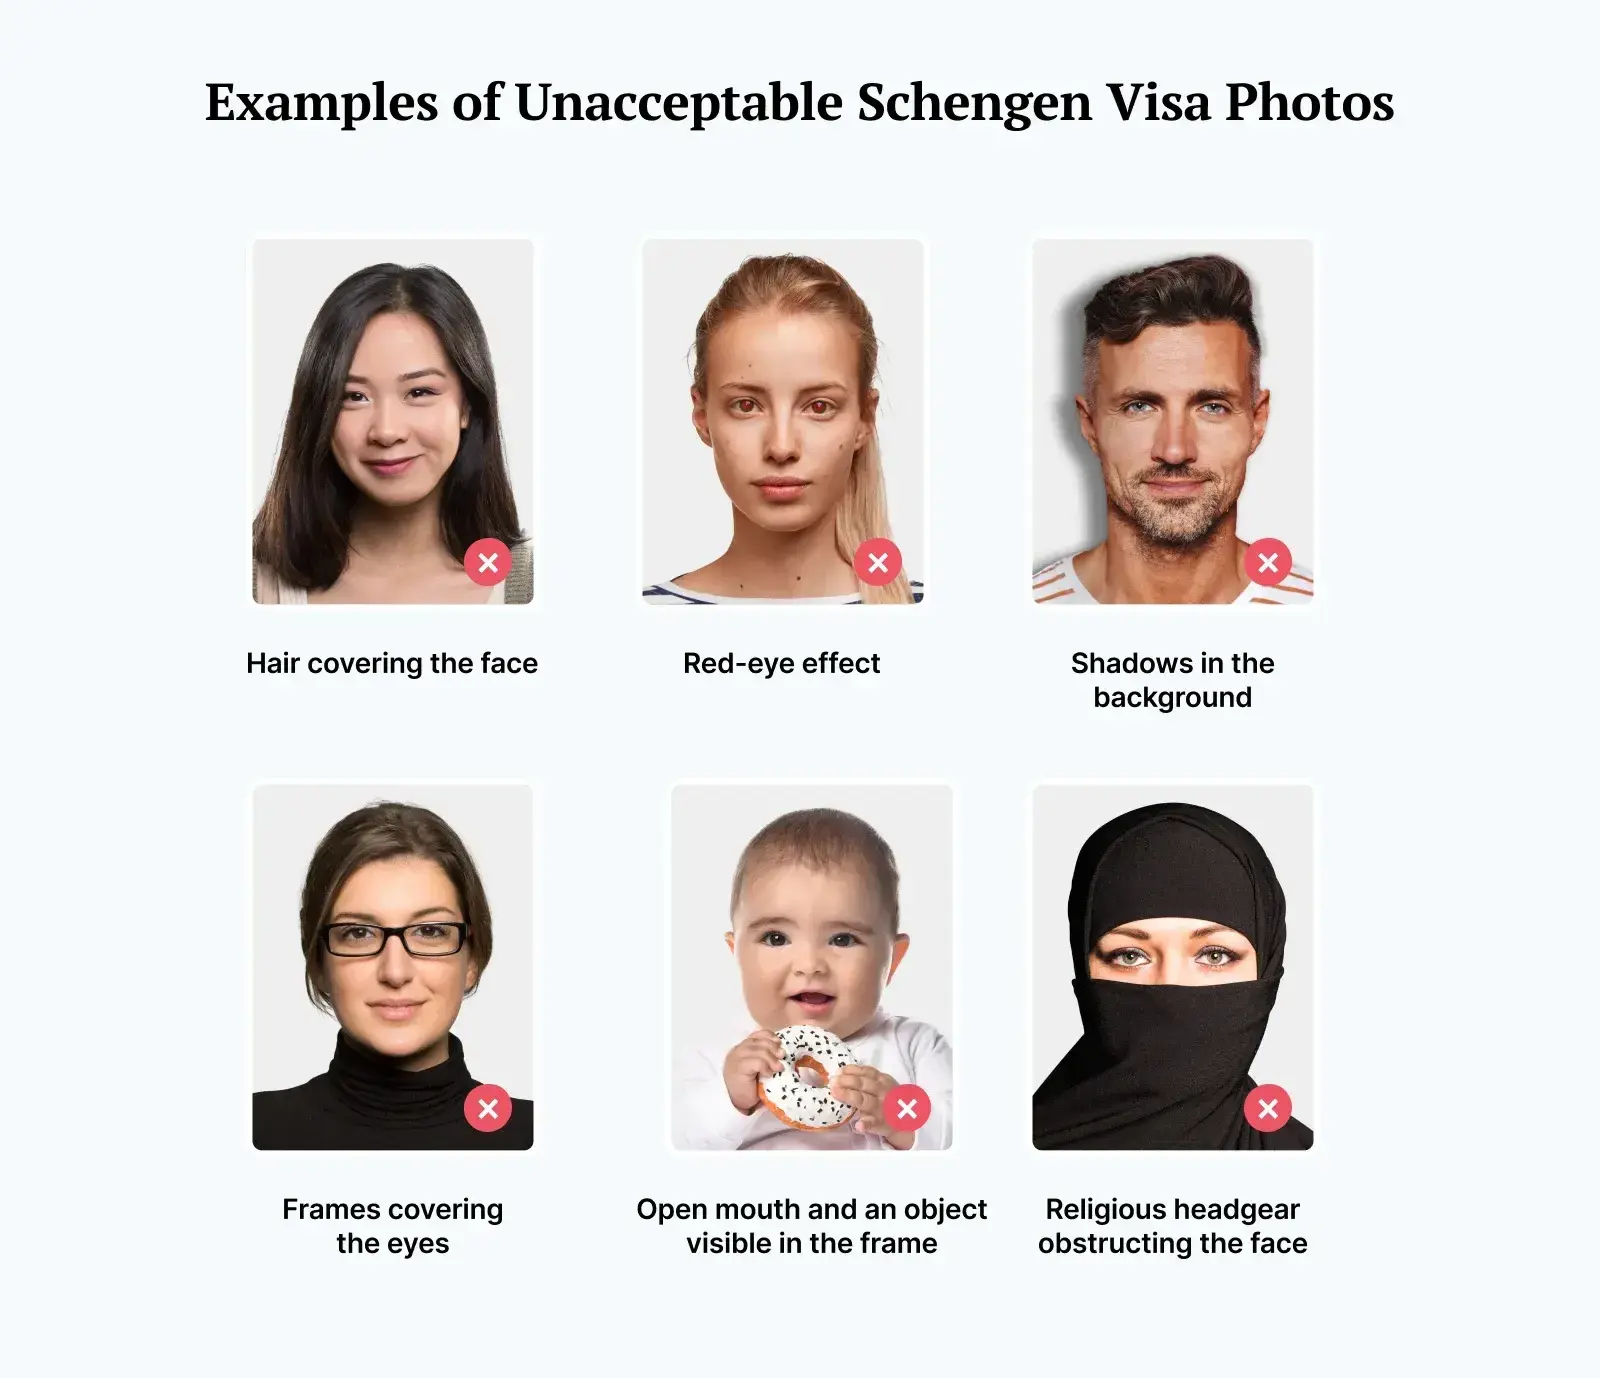 Examples of unacceptable photos for a Schengen visa, including shadows, red-eye effect, and more.